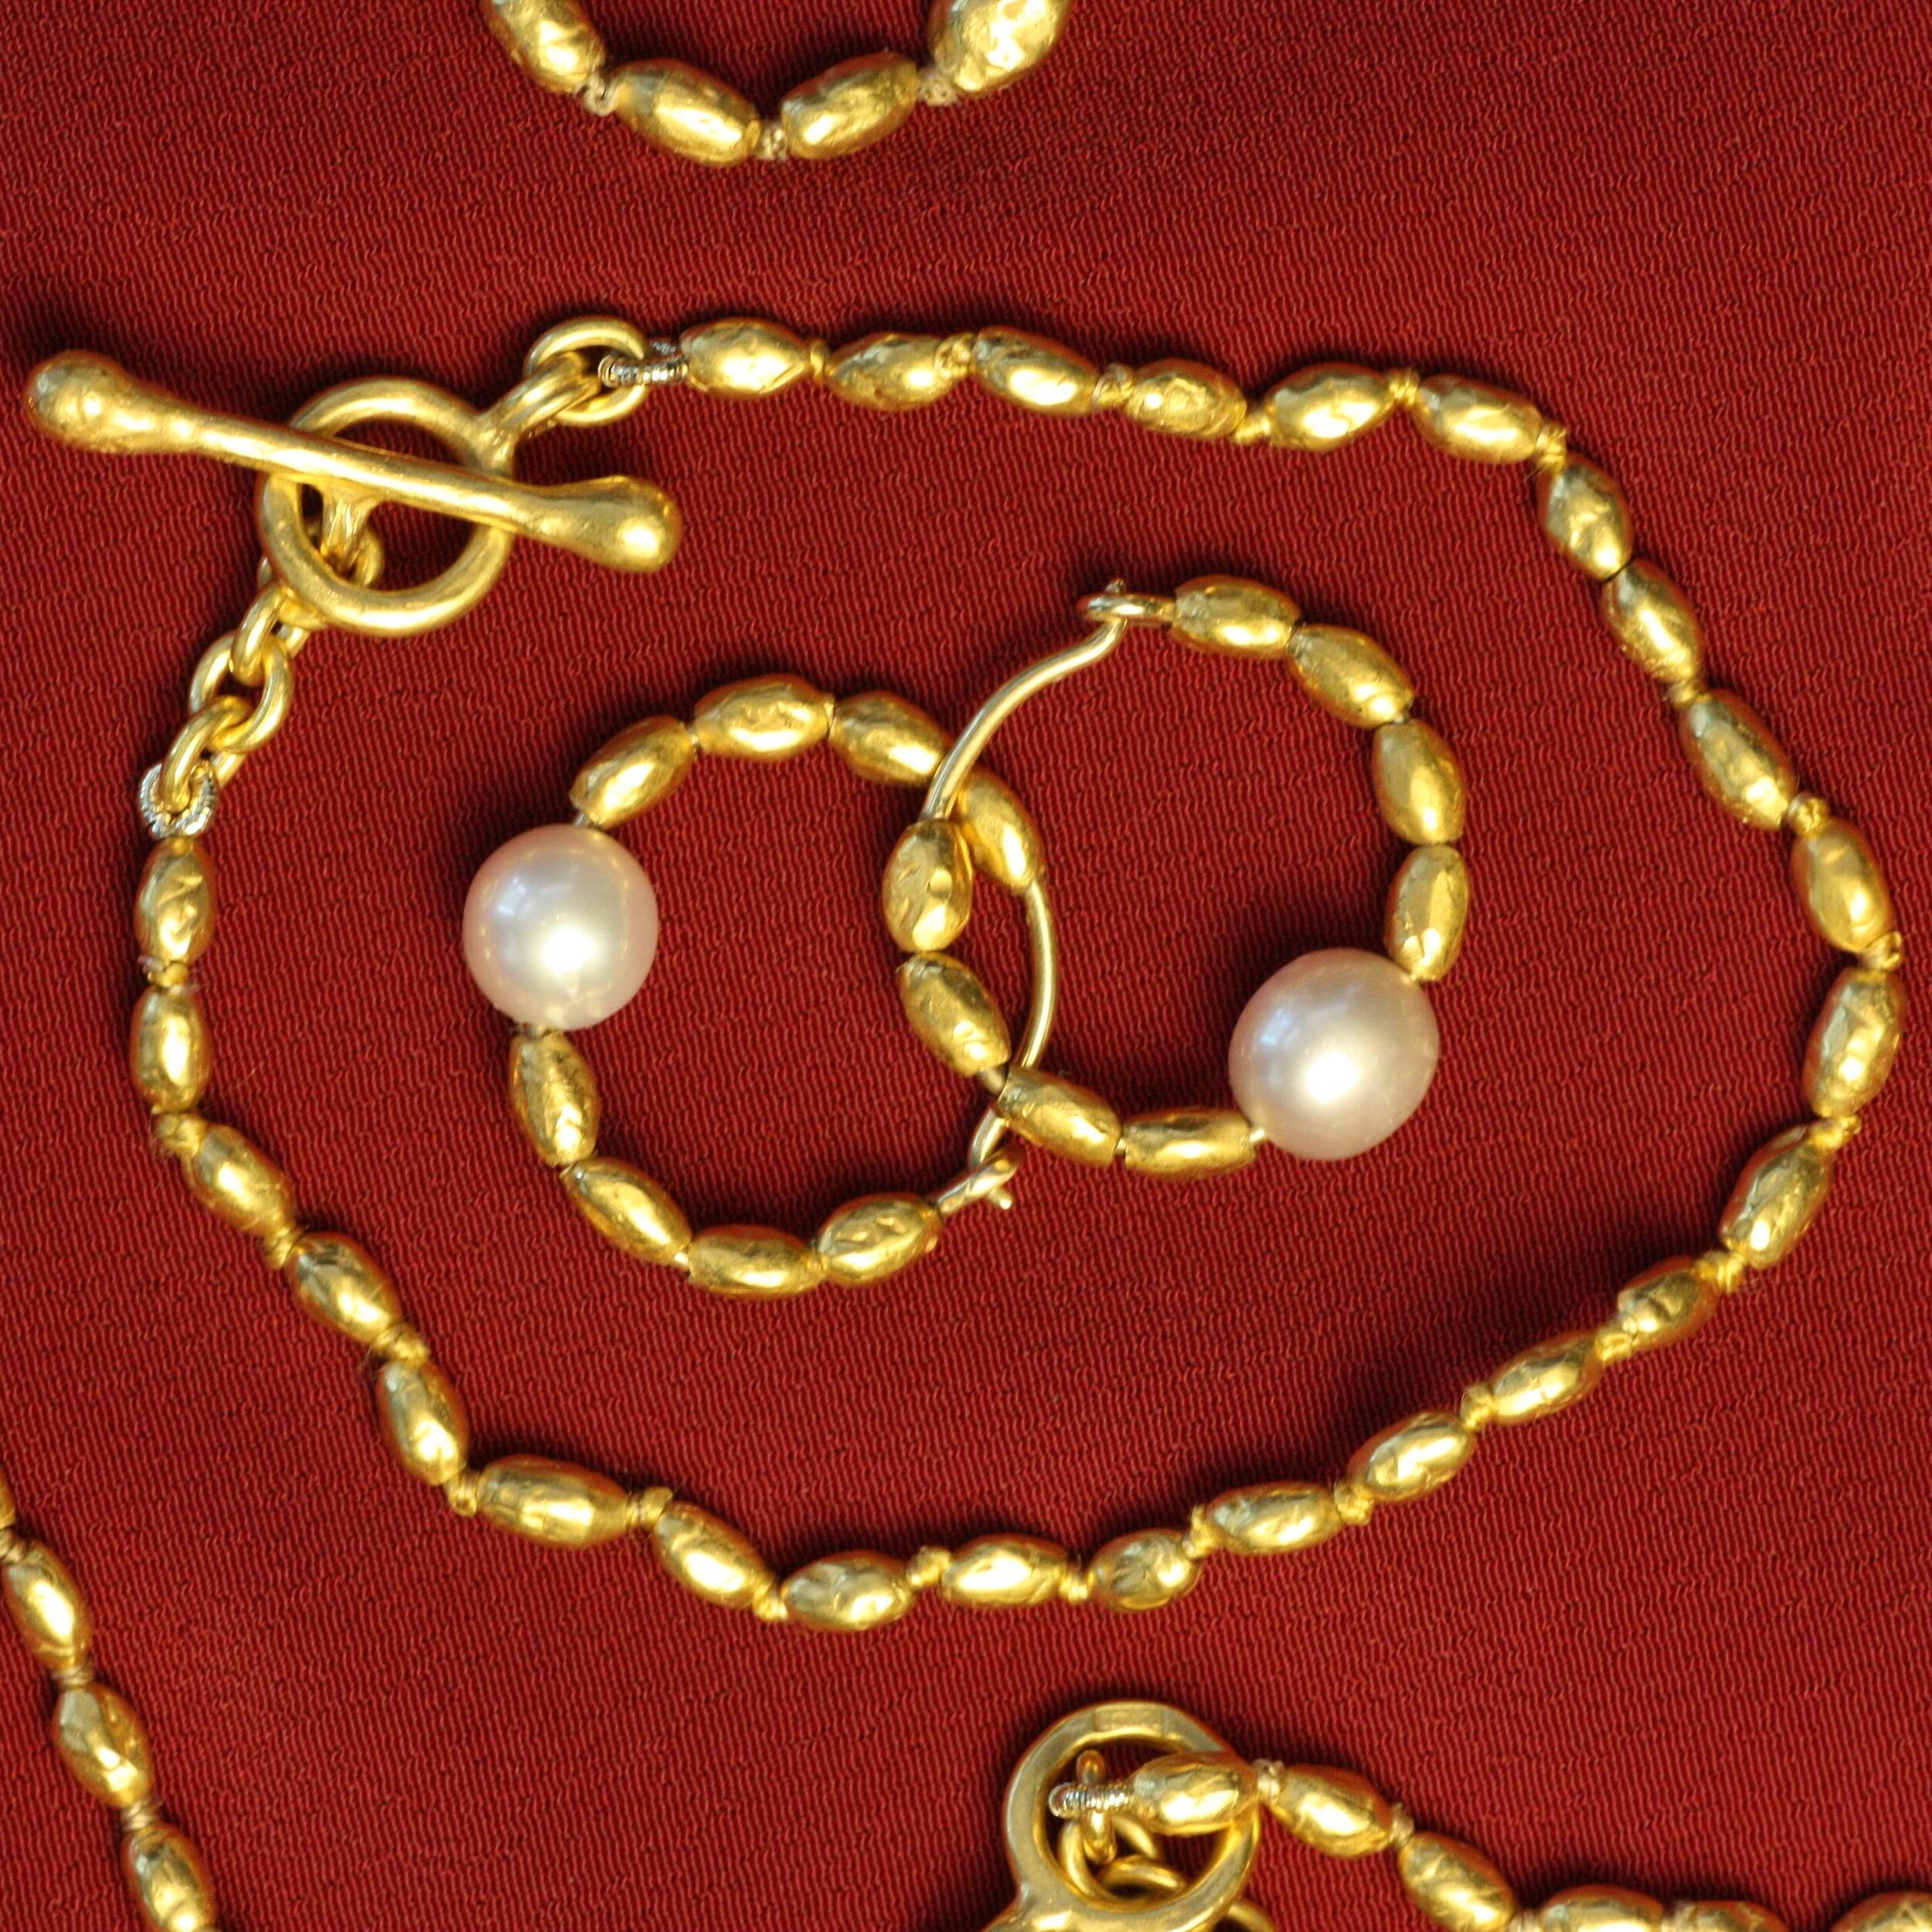 Bringing back matching sets: we love the eclectic look of mixed metals and styles&hellip;but our nugget collection of bracelet, necklace and earrings reminds us of the beauty and simplicity of a classic coordinated set. Hand-strung 22k gold nuggets o